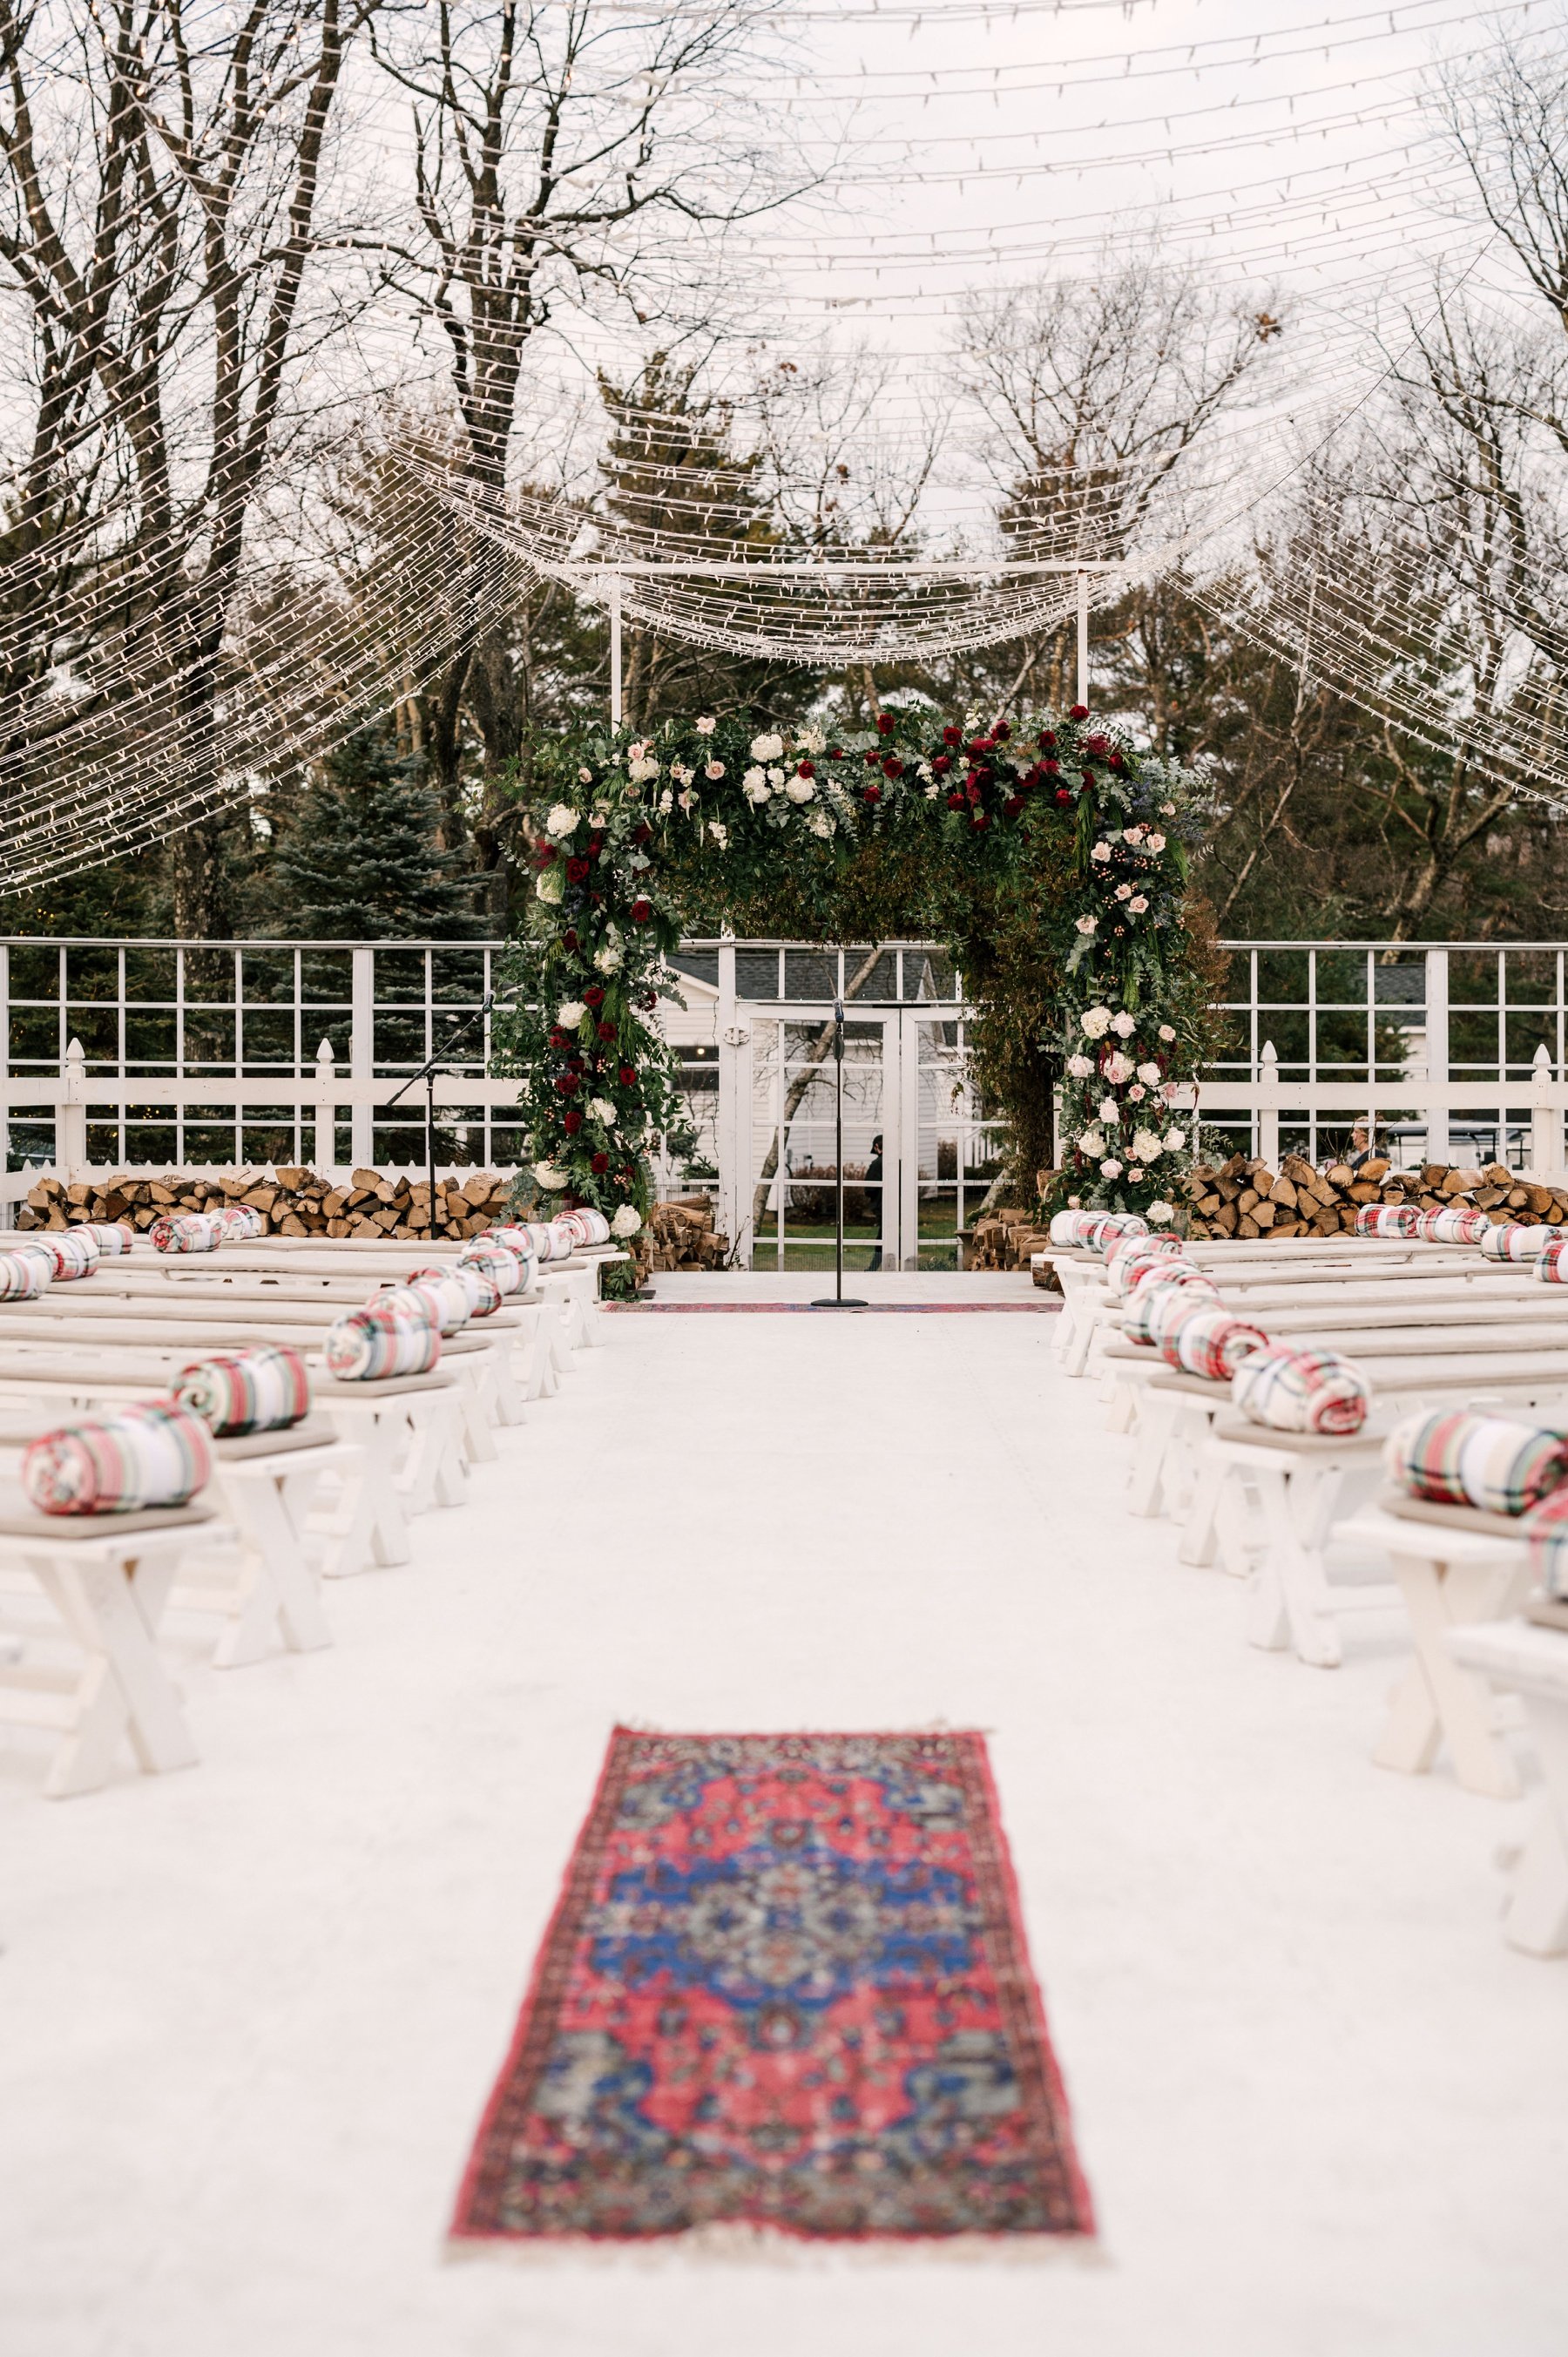 Winter wedding ceremony with vintage rugs, plaid blankets, and bistro lights